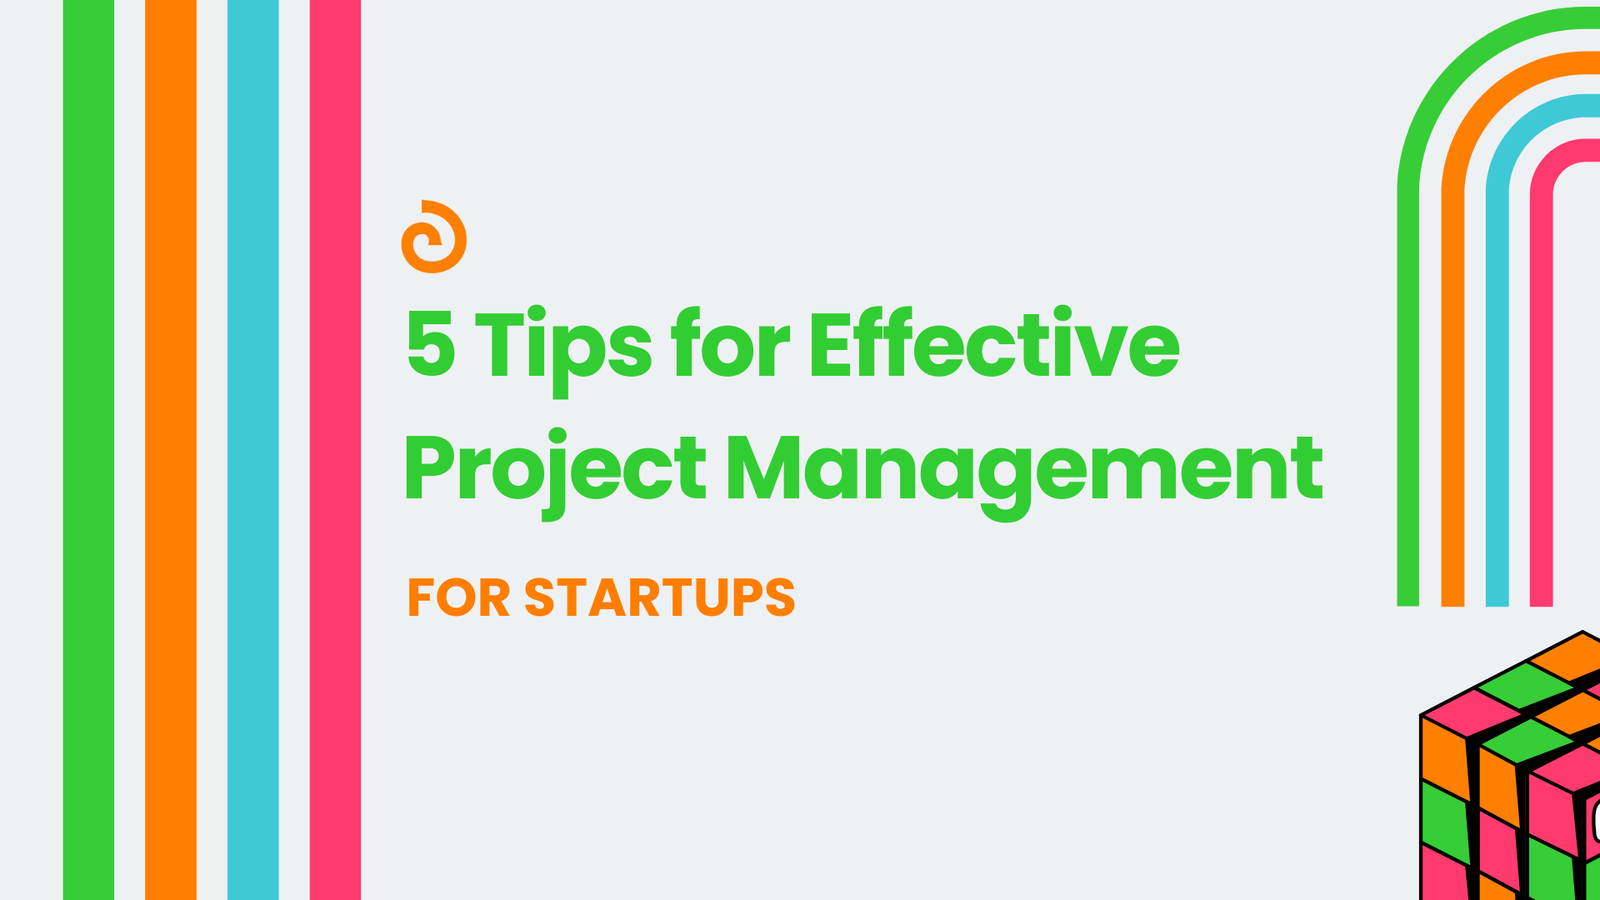 5 Tips for Effective Project Management for Startups